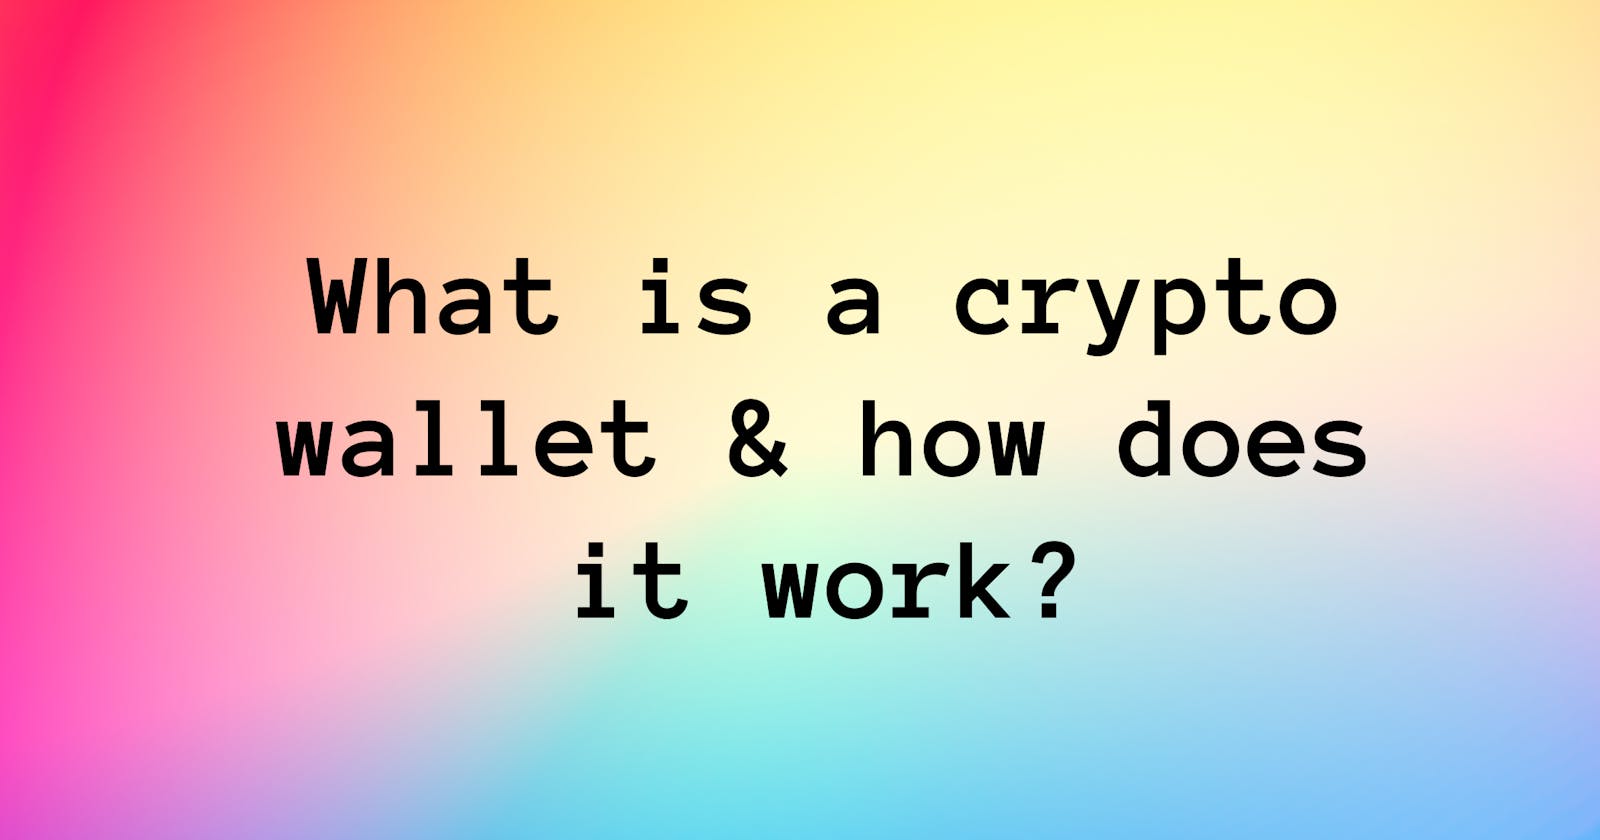 What is a crypto wallet & how does it work?